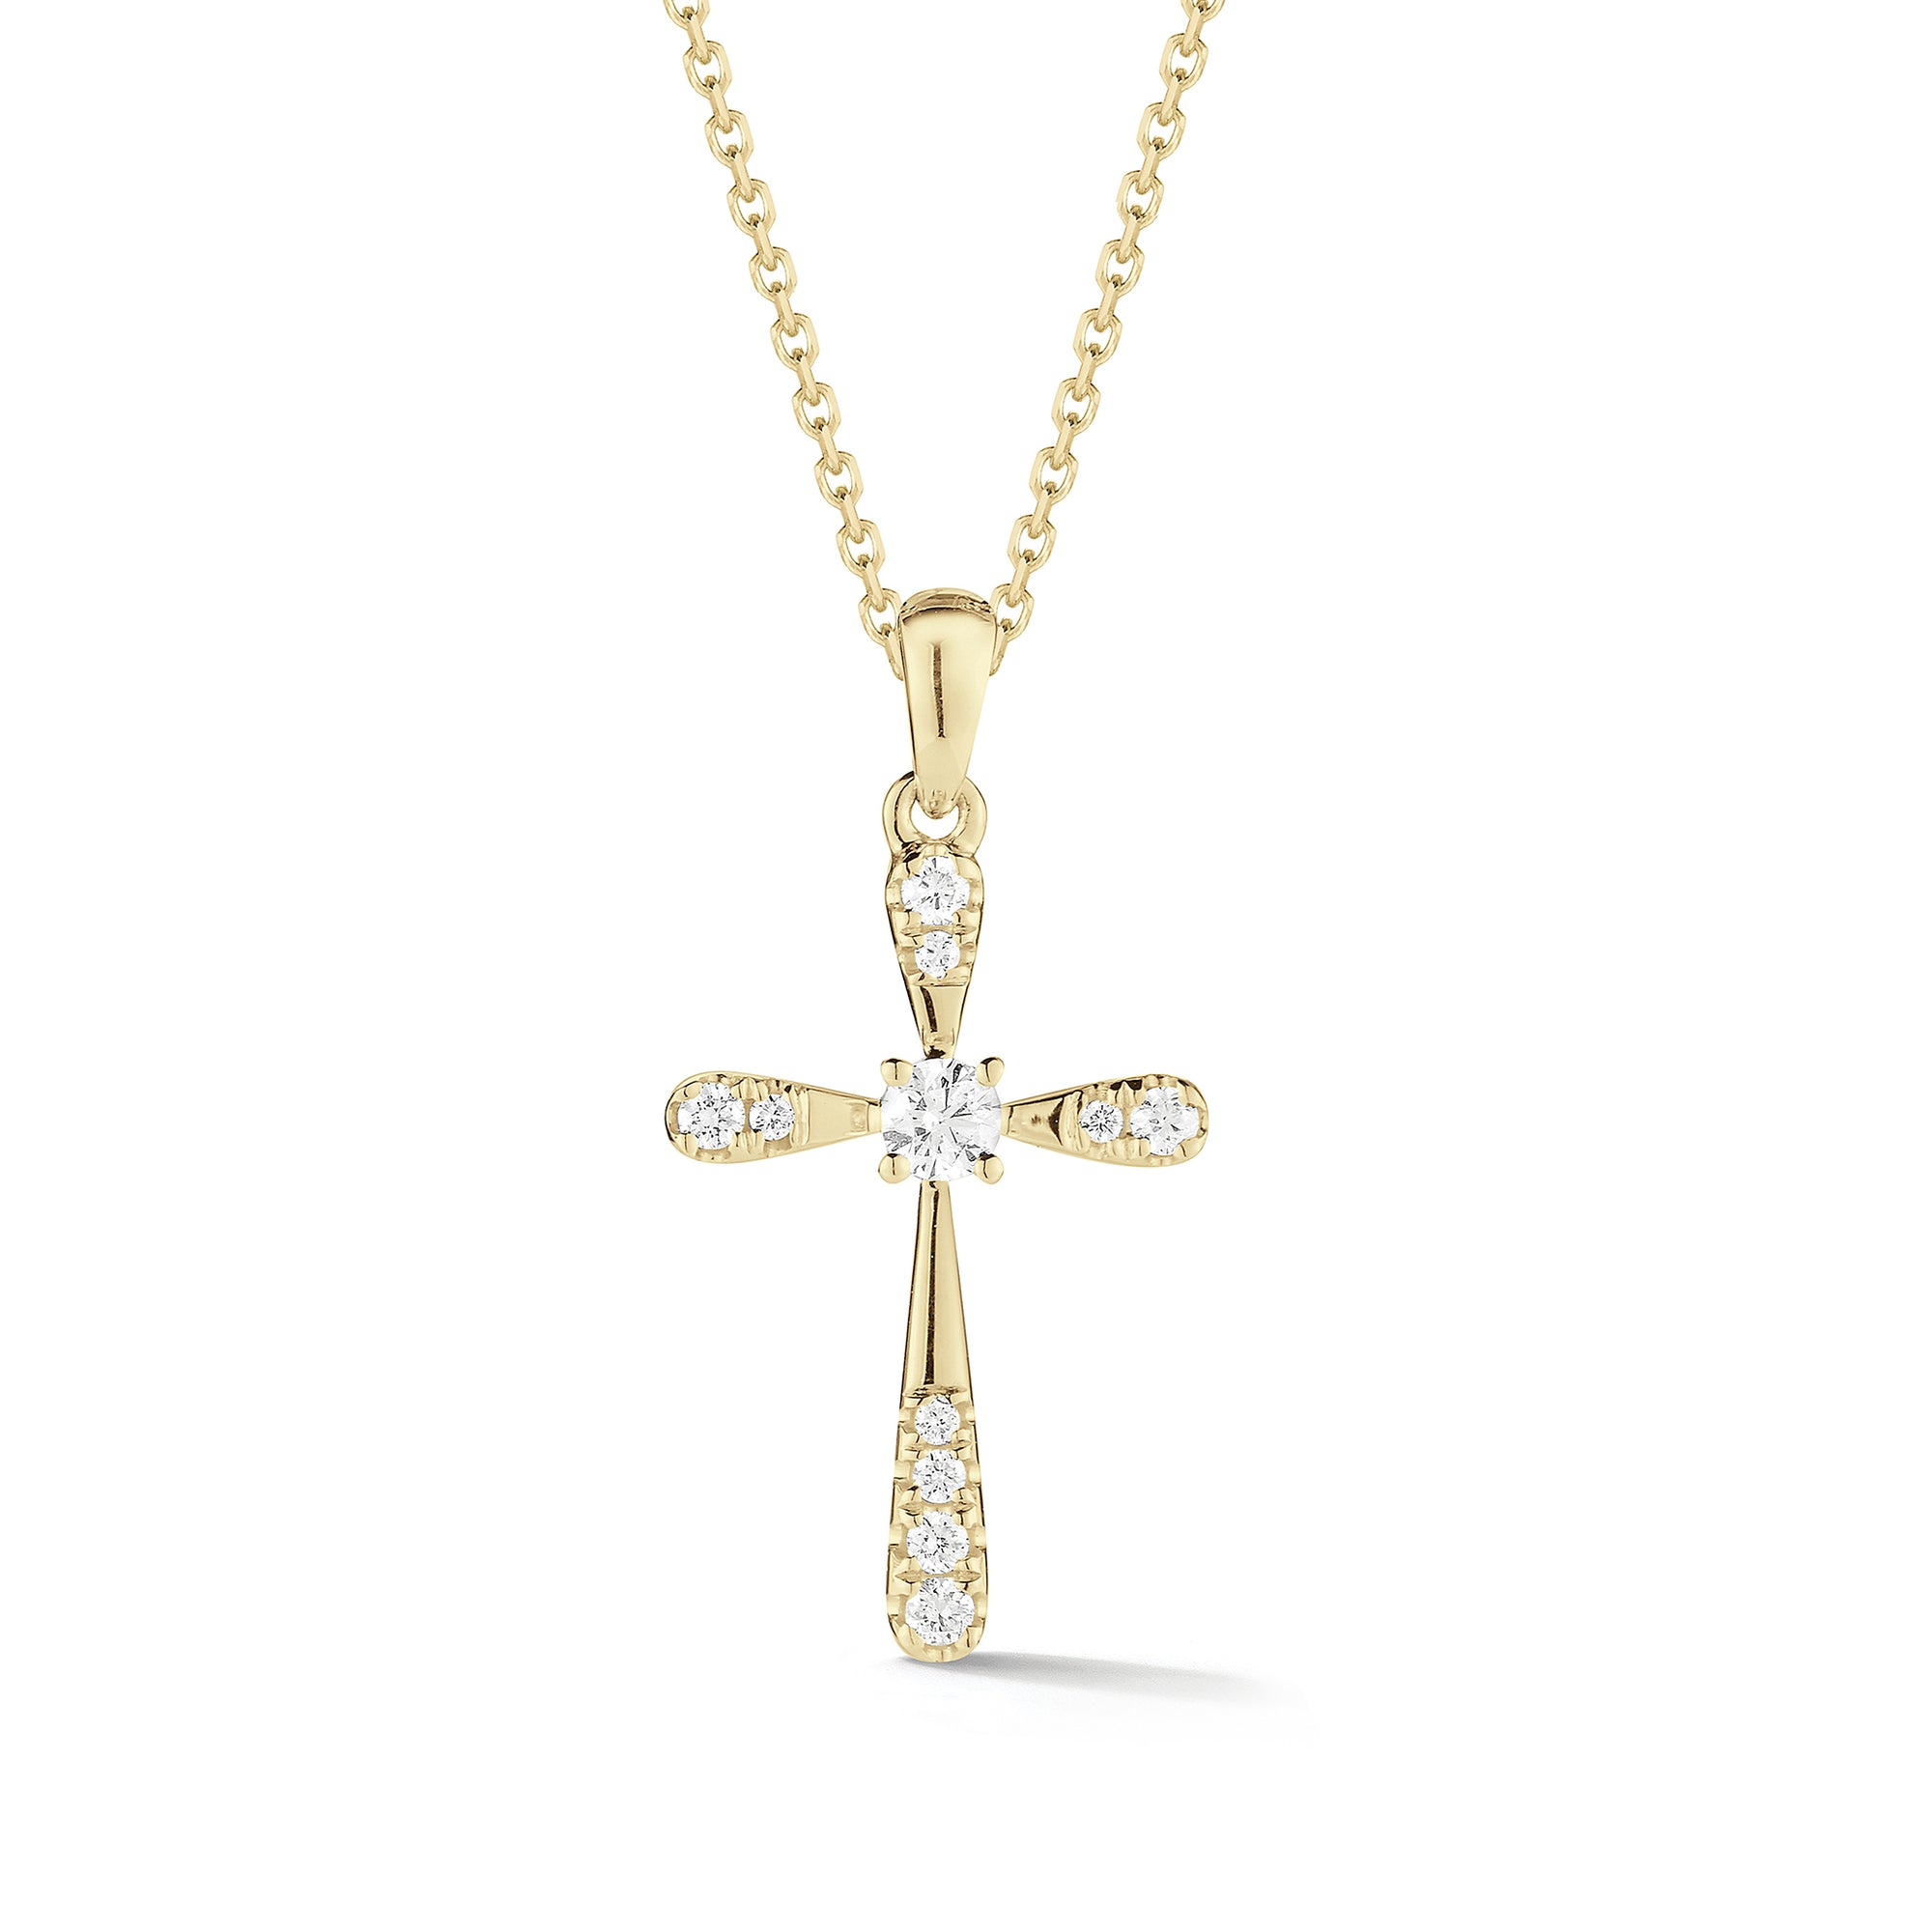 Diamond & Gold Rounded Cross Pendant Necklace  An ideal christening, communion, confirmation, birthday, or holiday gift.  -14K gold weighing 1.57 grams  -8 round prong-set diamonds totaling 0.09 carats